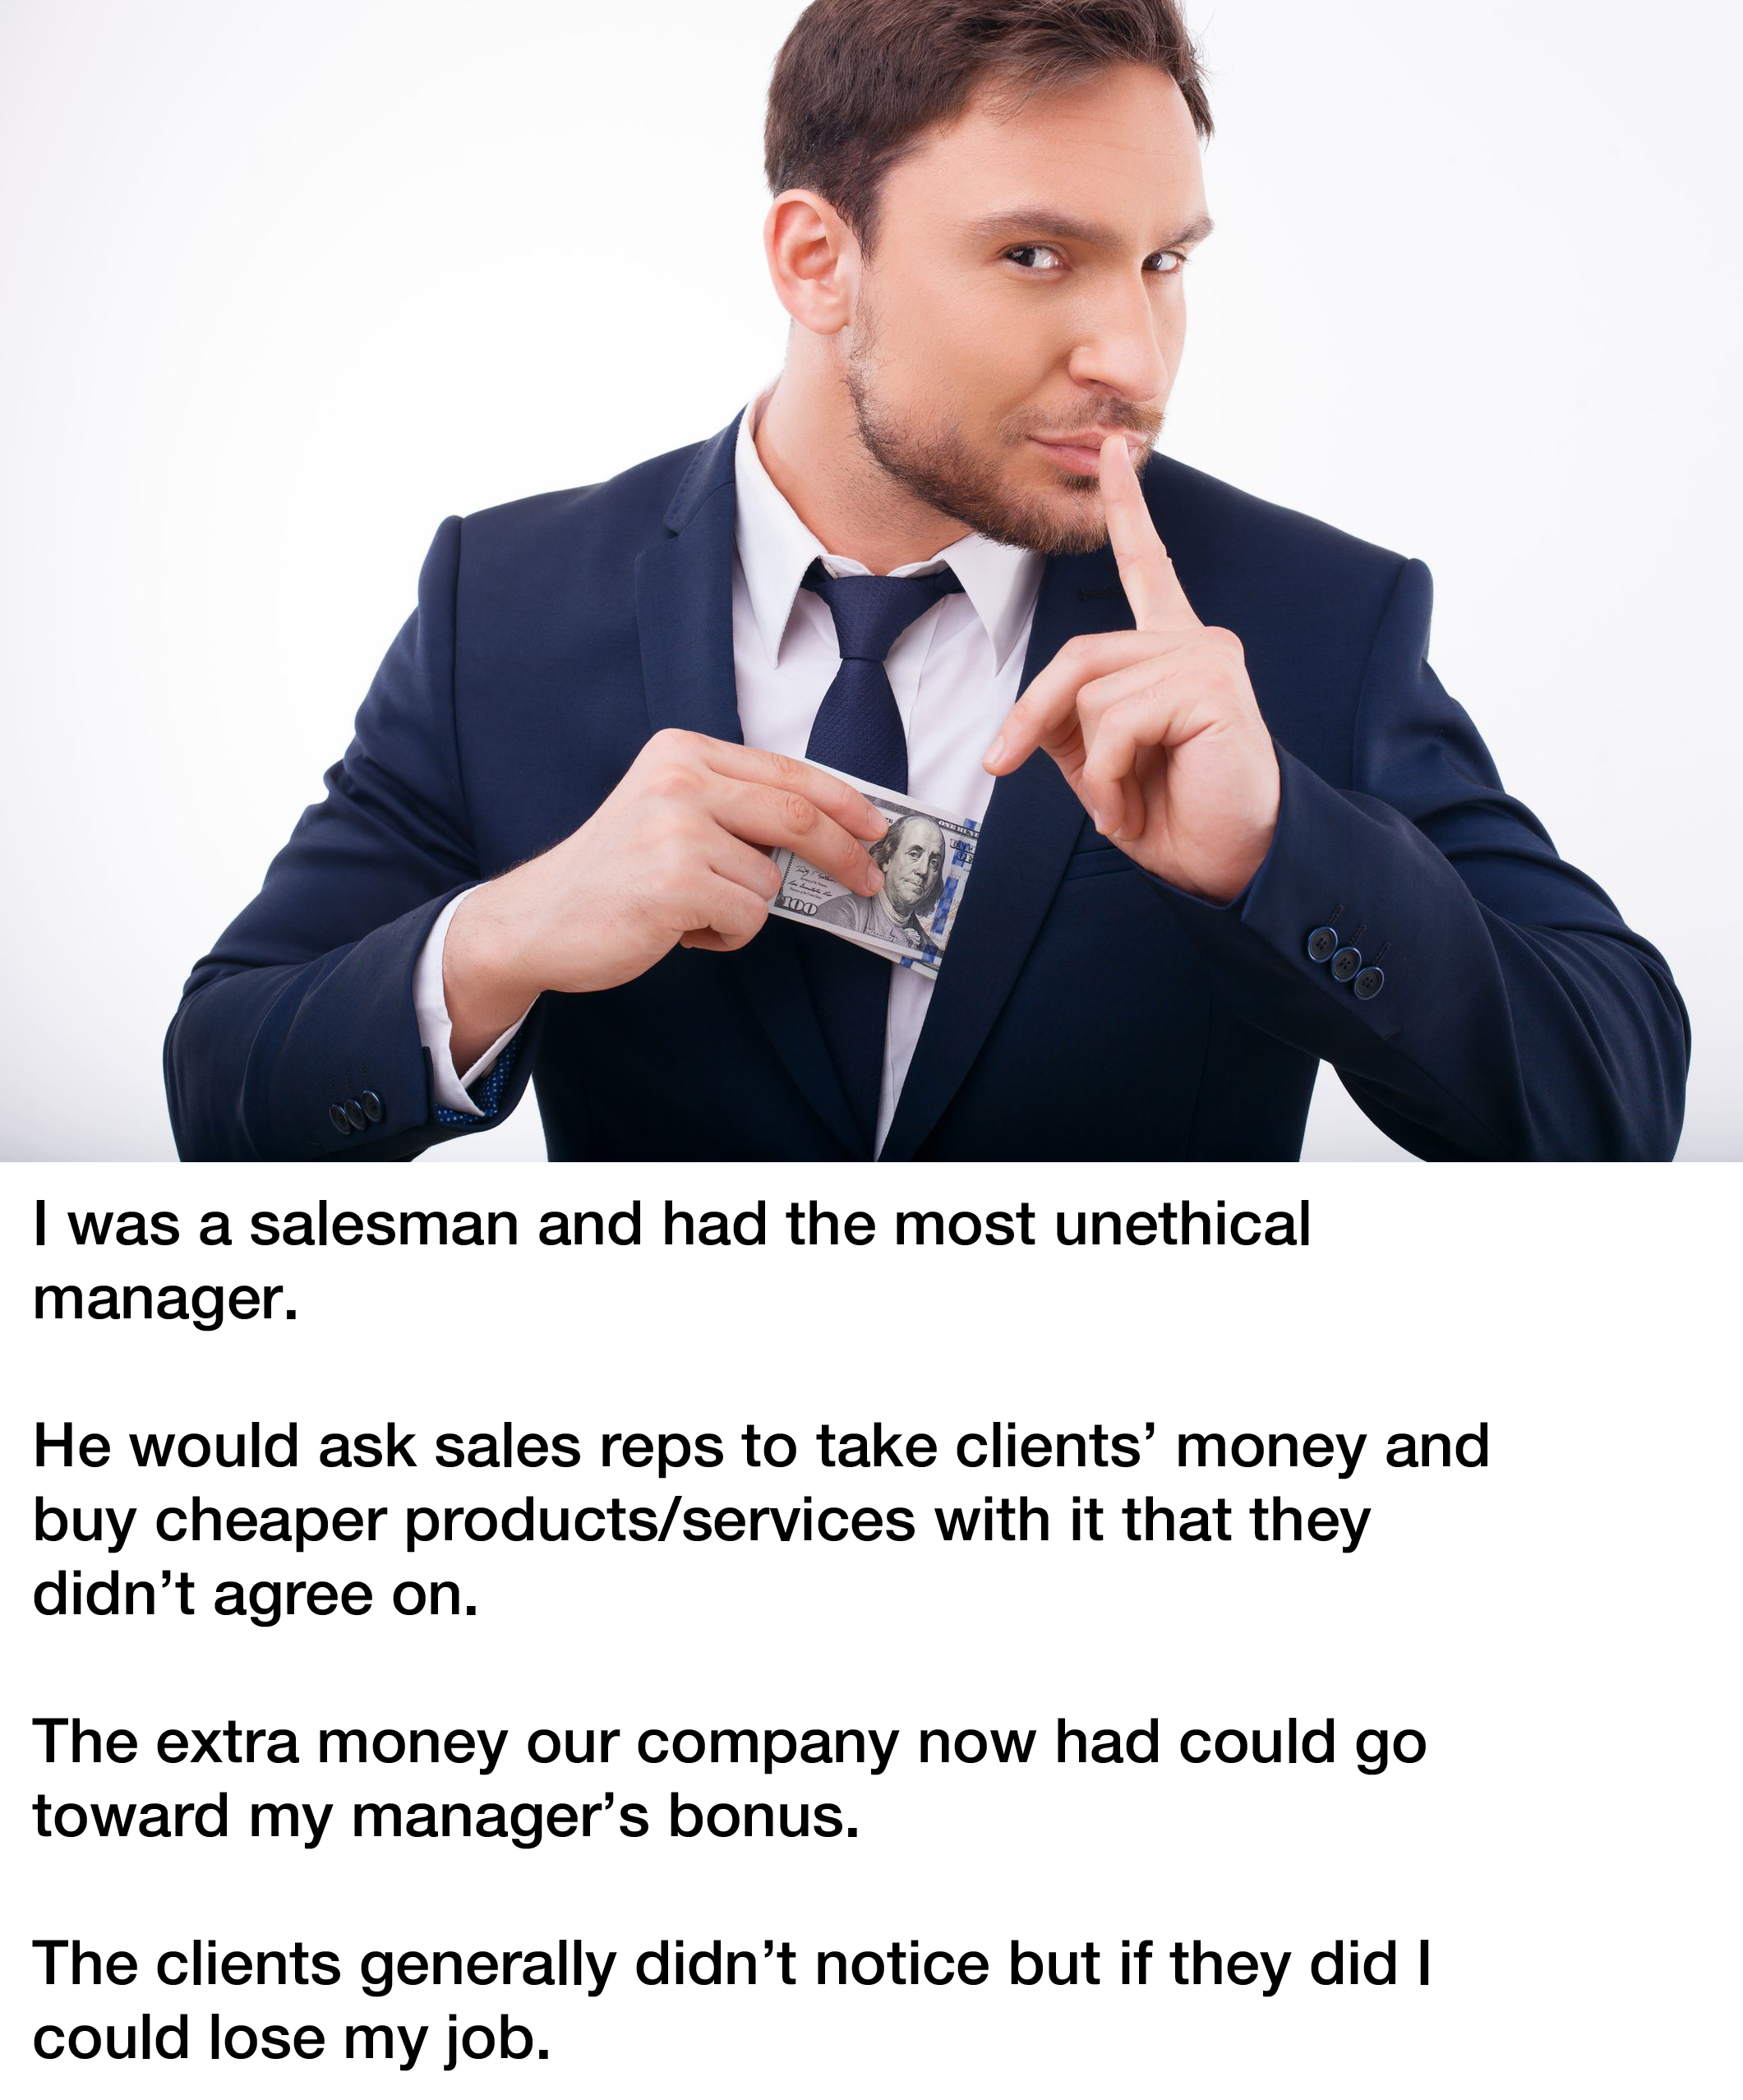 bad manager revenge story reddit -- I was a salesman and had the most unethical manager. He would ask sales reps to take clients' money and buy cheaper productsservices with it that they didn't agree on. The extra money our company now had could go toward